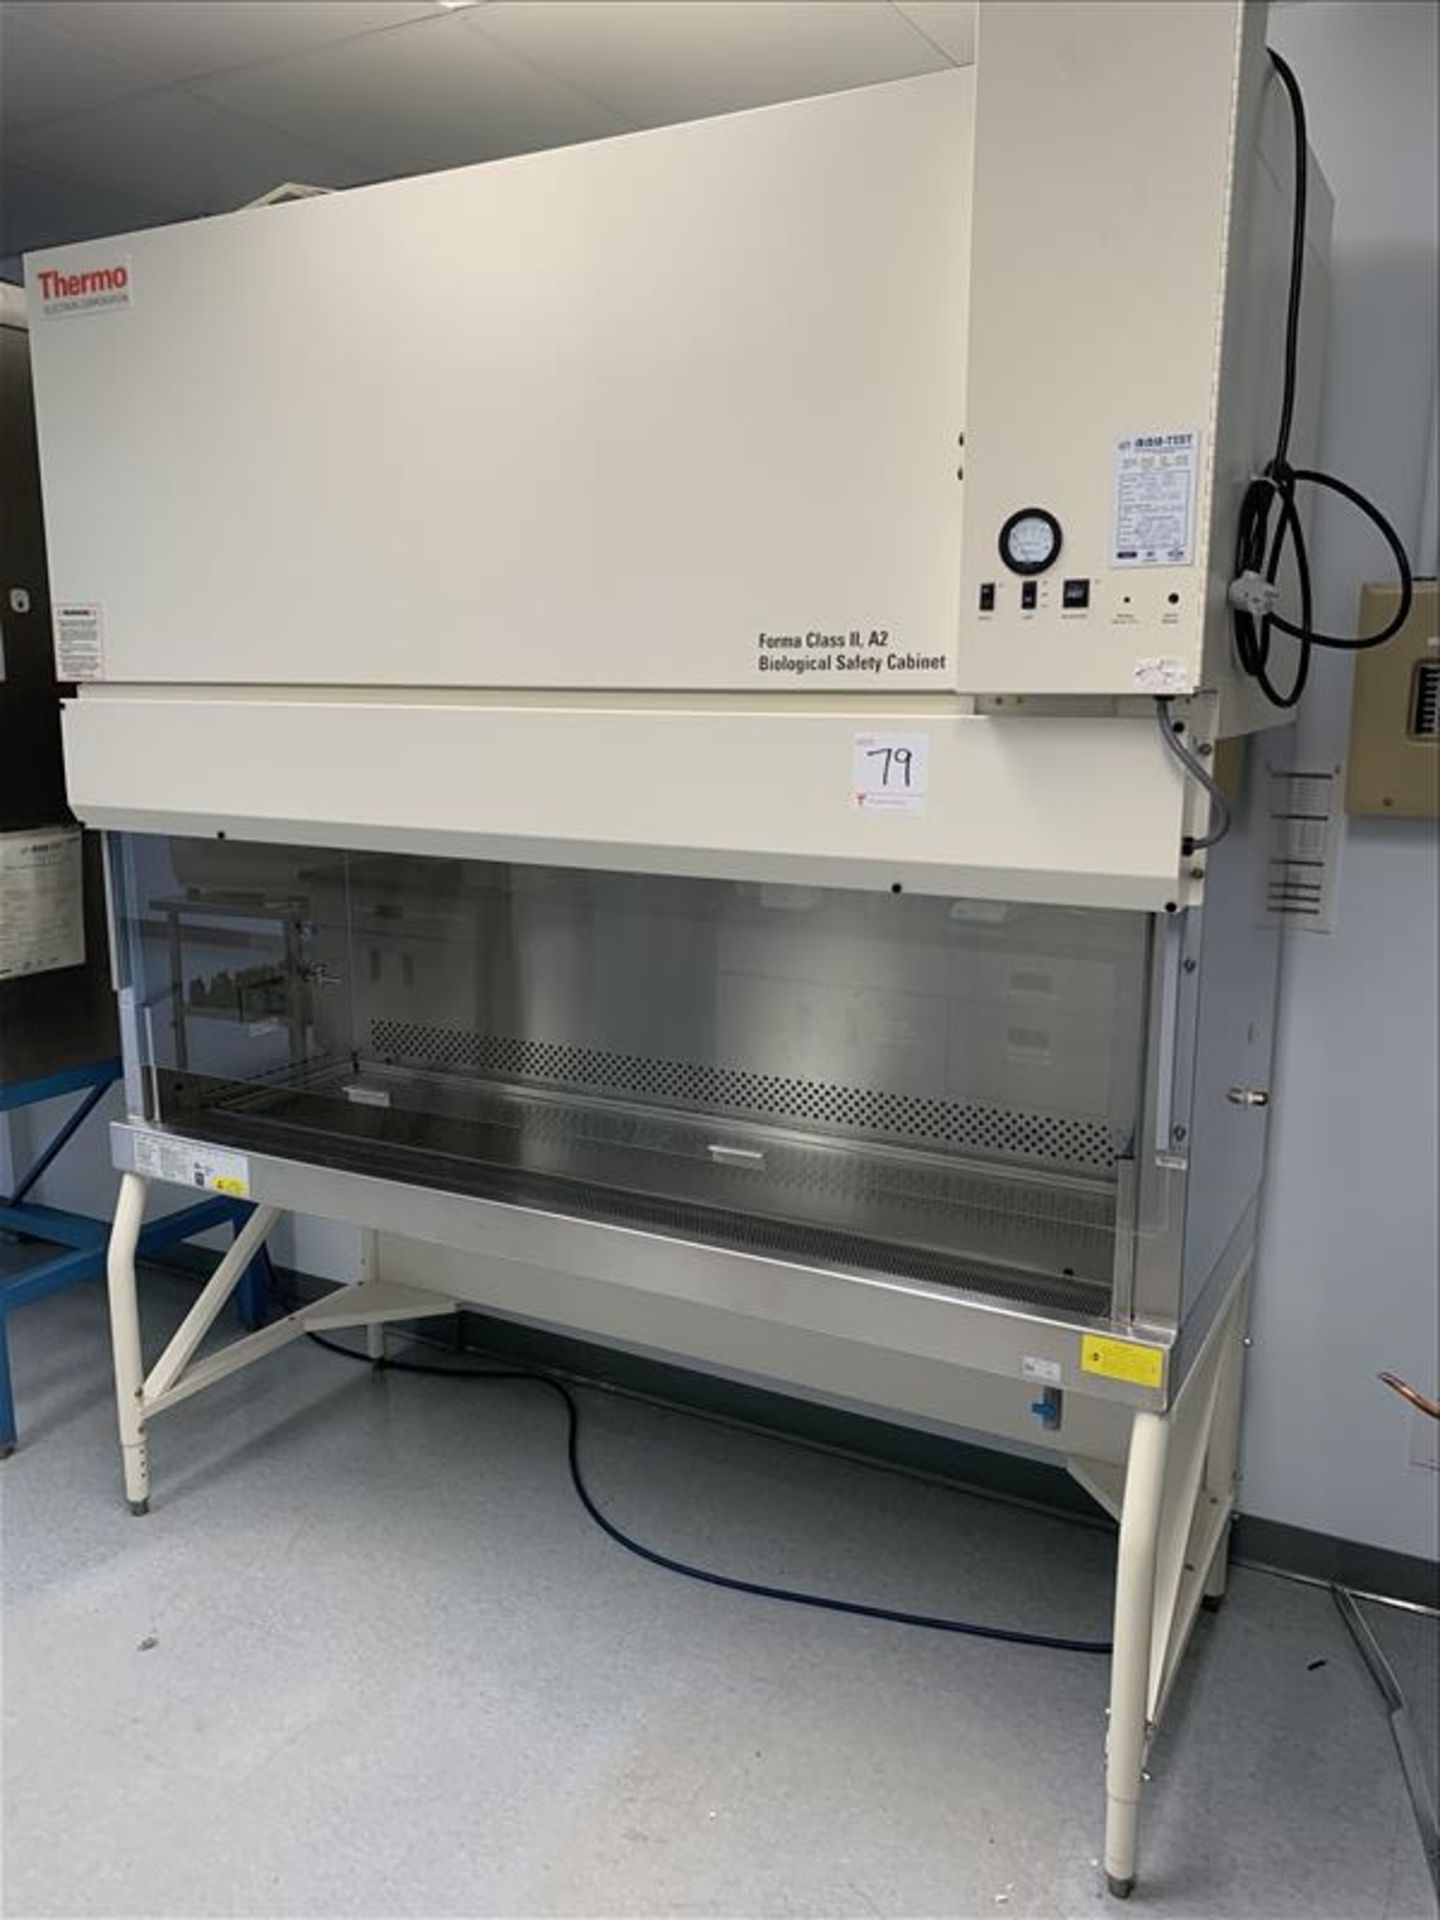 Thermo Electron 6 Ft. Class II, A2, Biosafety Cabinet, Stand mod. 1286 S/N 107428